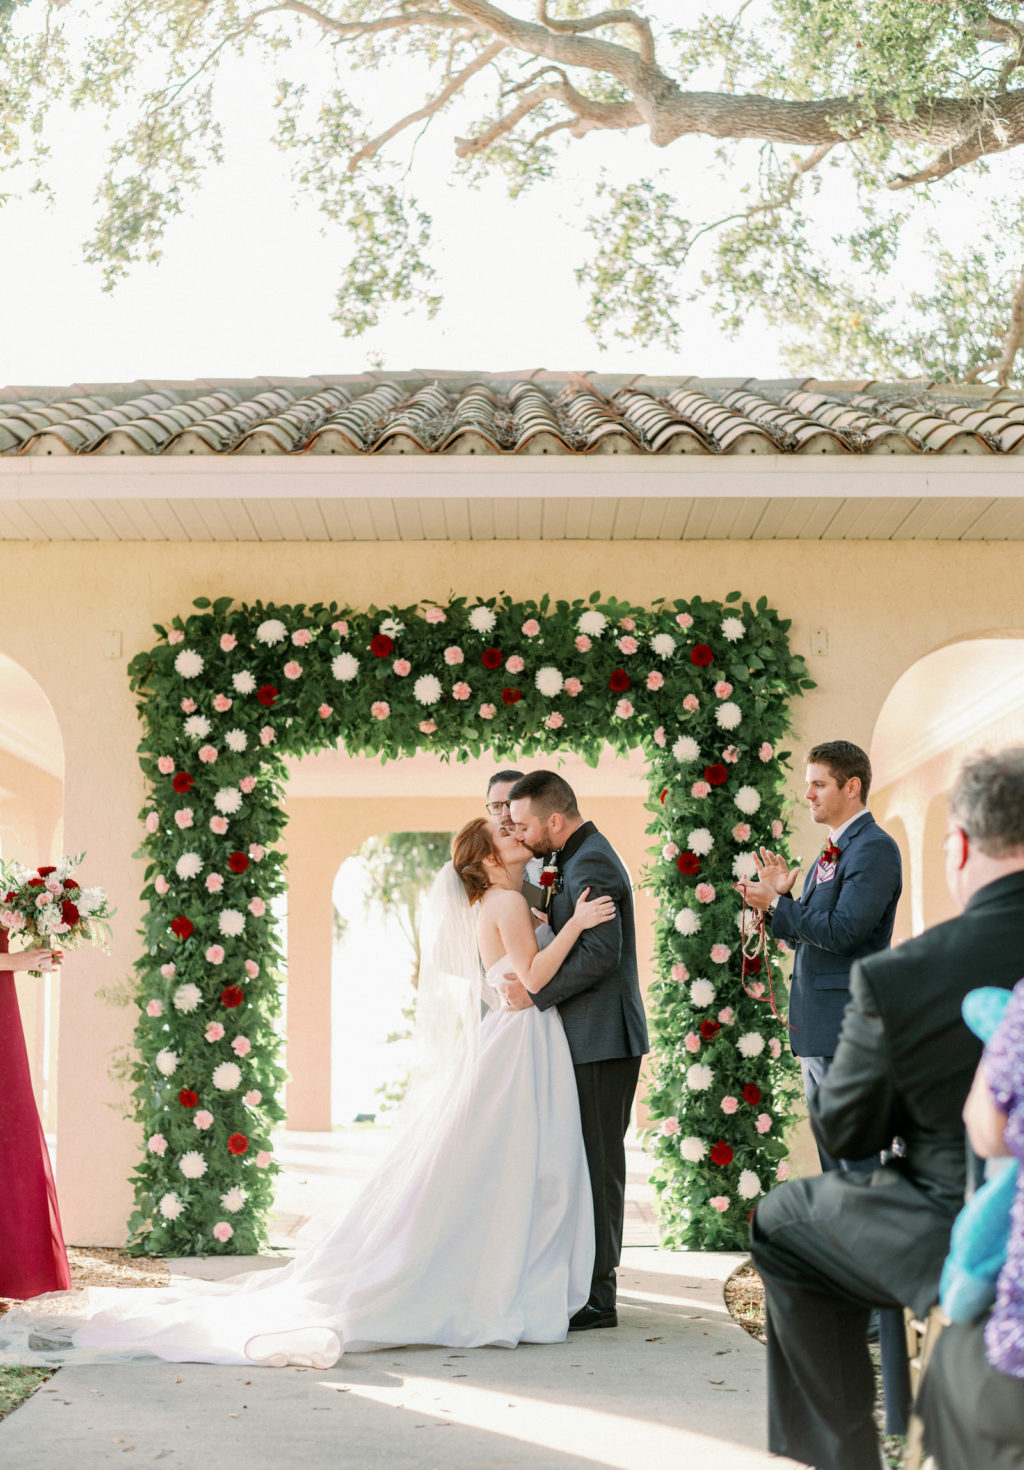 Timeless Romantic Bride and Groom Exchanging Wedding Vows at Gazebo with Greenery Burgundy Red, Blush Pink and White Floral Arch | Tampa Bay Wedding Photographer Dewitt for Love Photography | Sarasota Wedding Venue Powel Crosley Estate